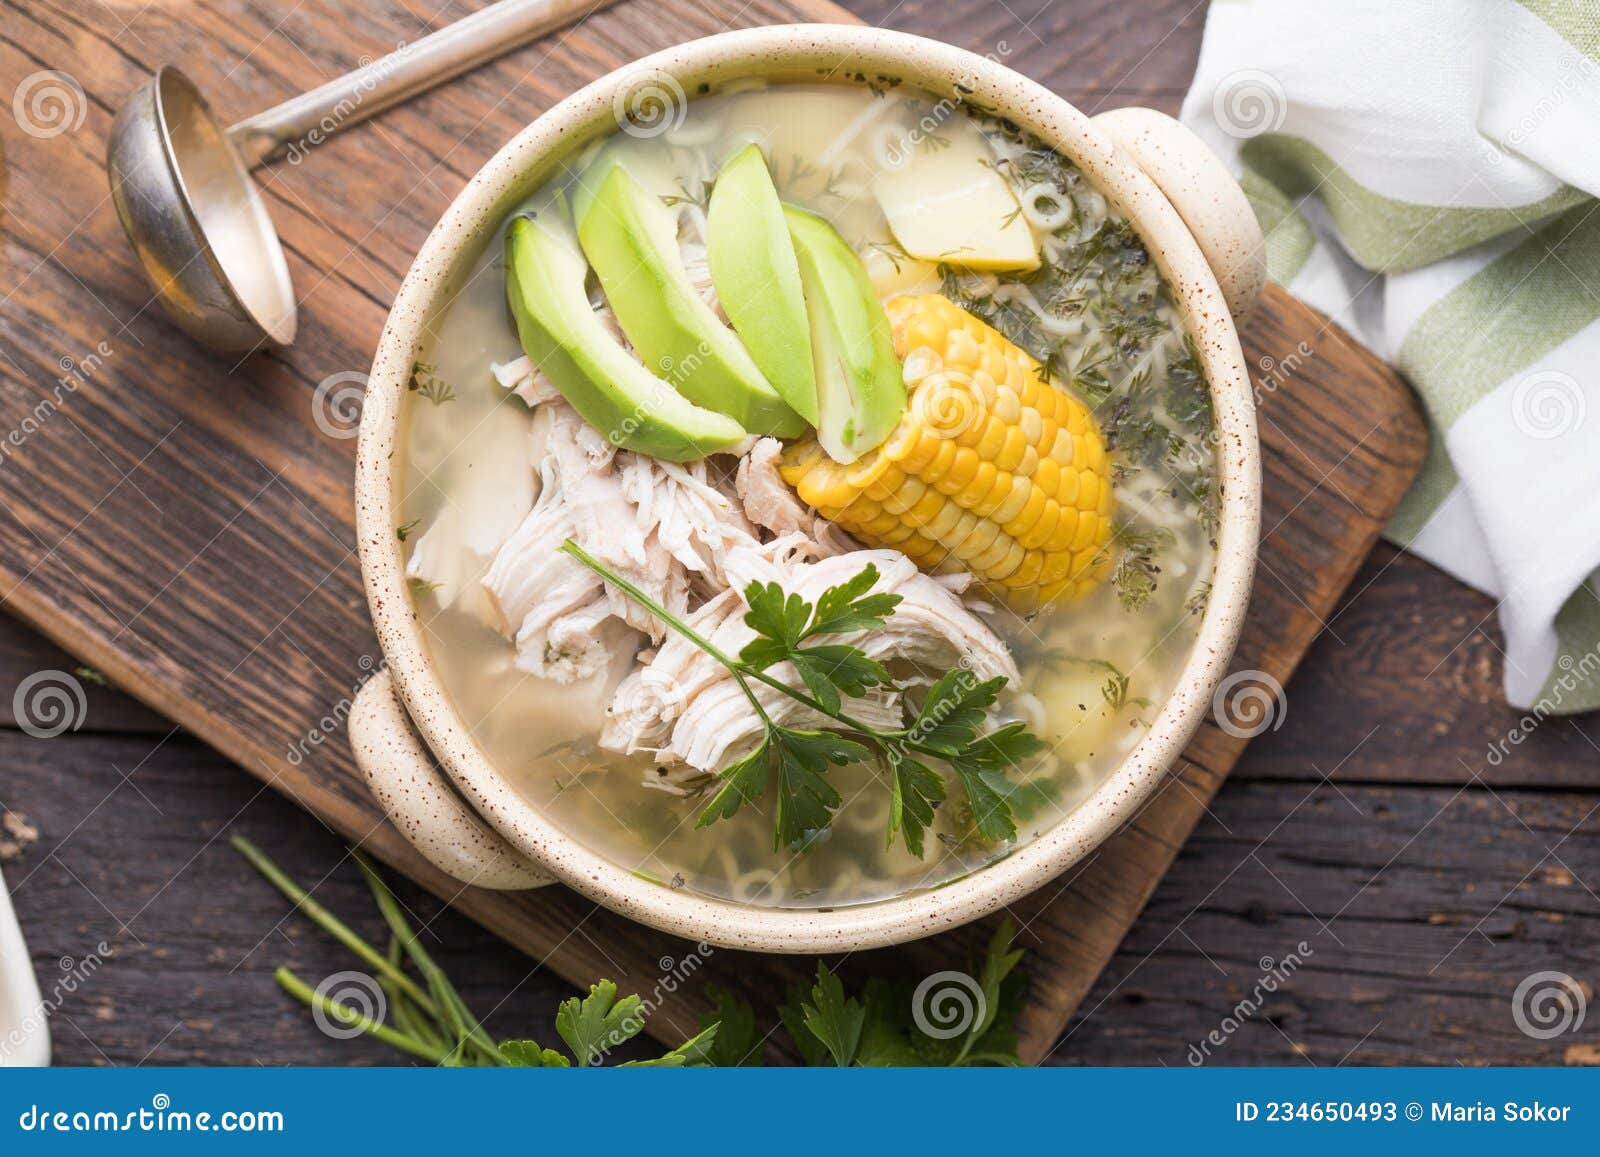 traditional ajiaco colombiano - colombian soup with potato, chicken, avocado